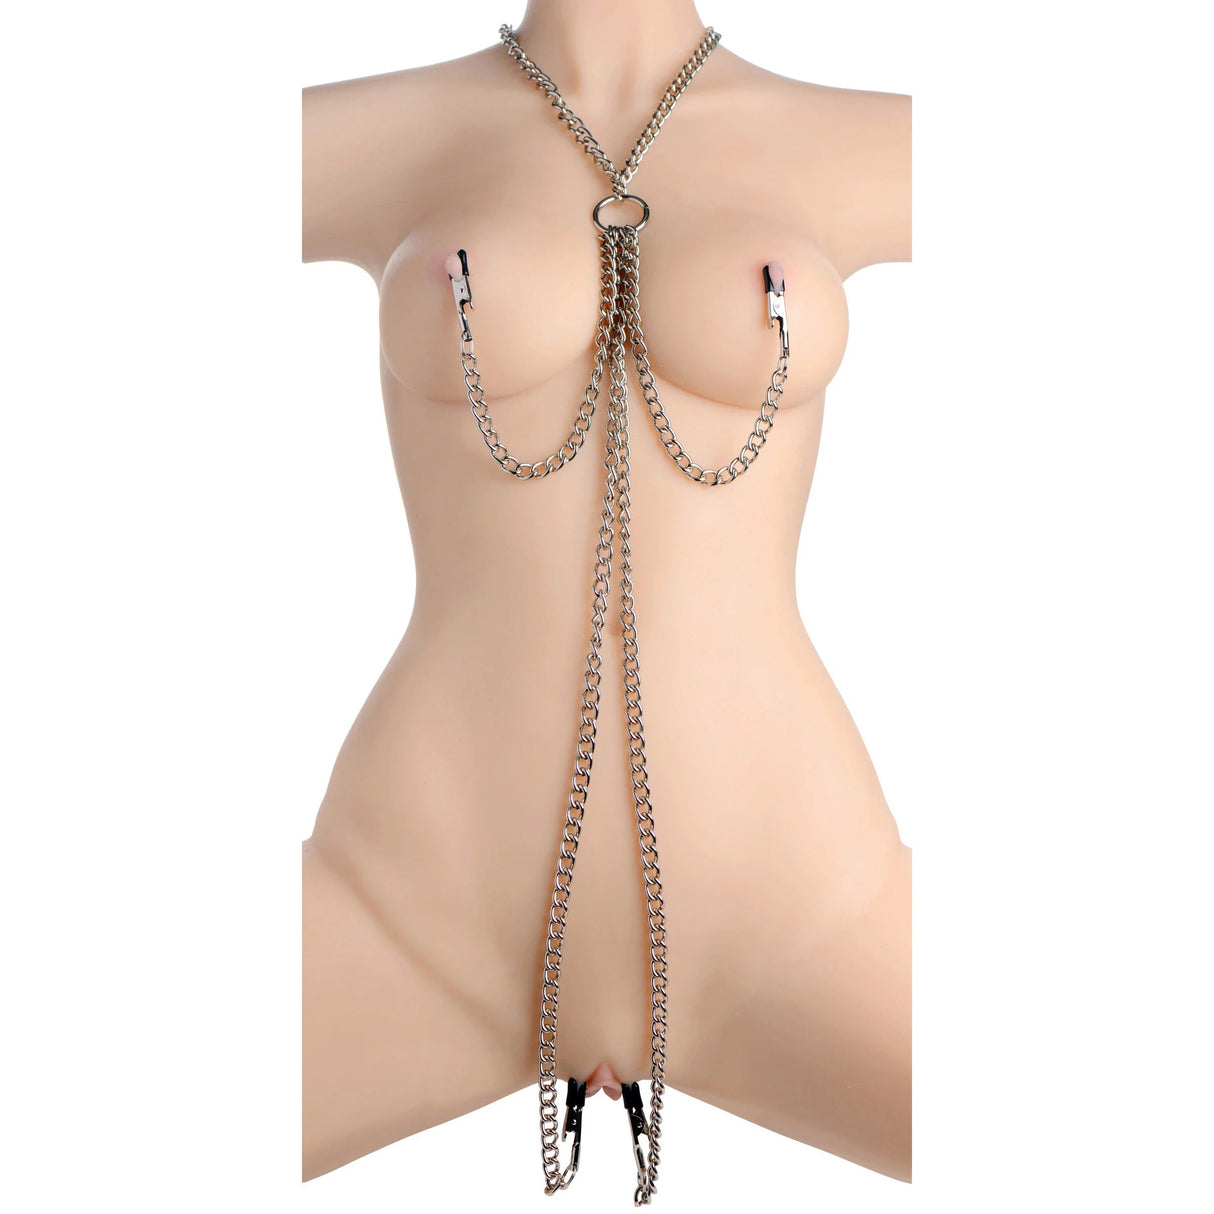 Master Series Chain Collar Nipple and Clit Clamp Set